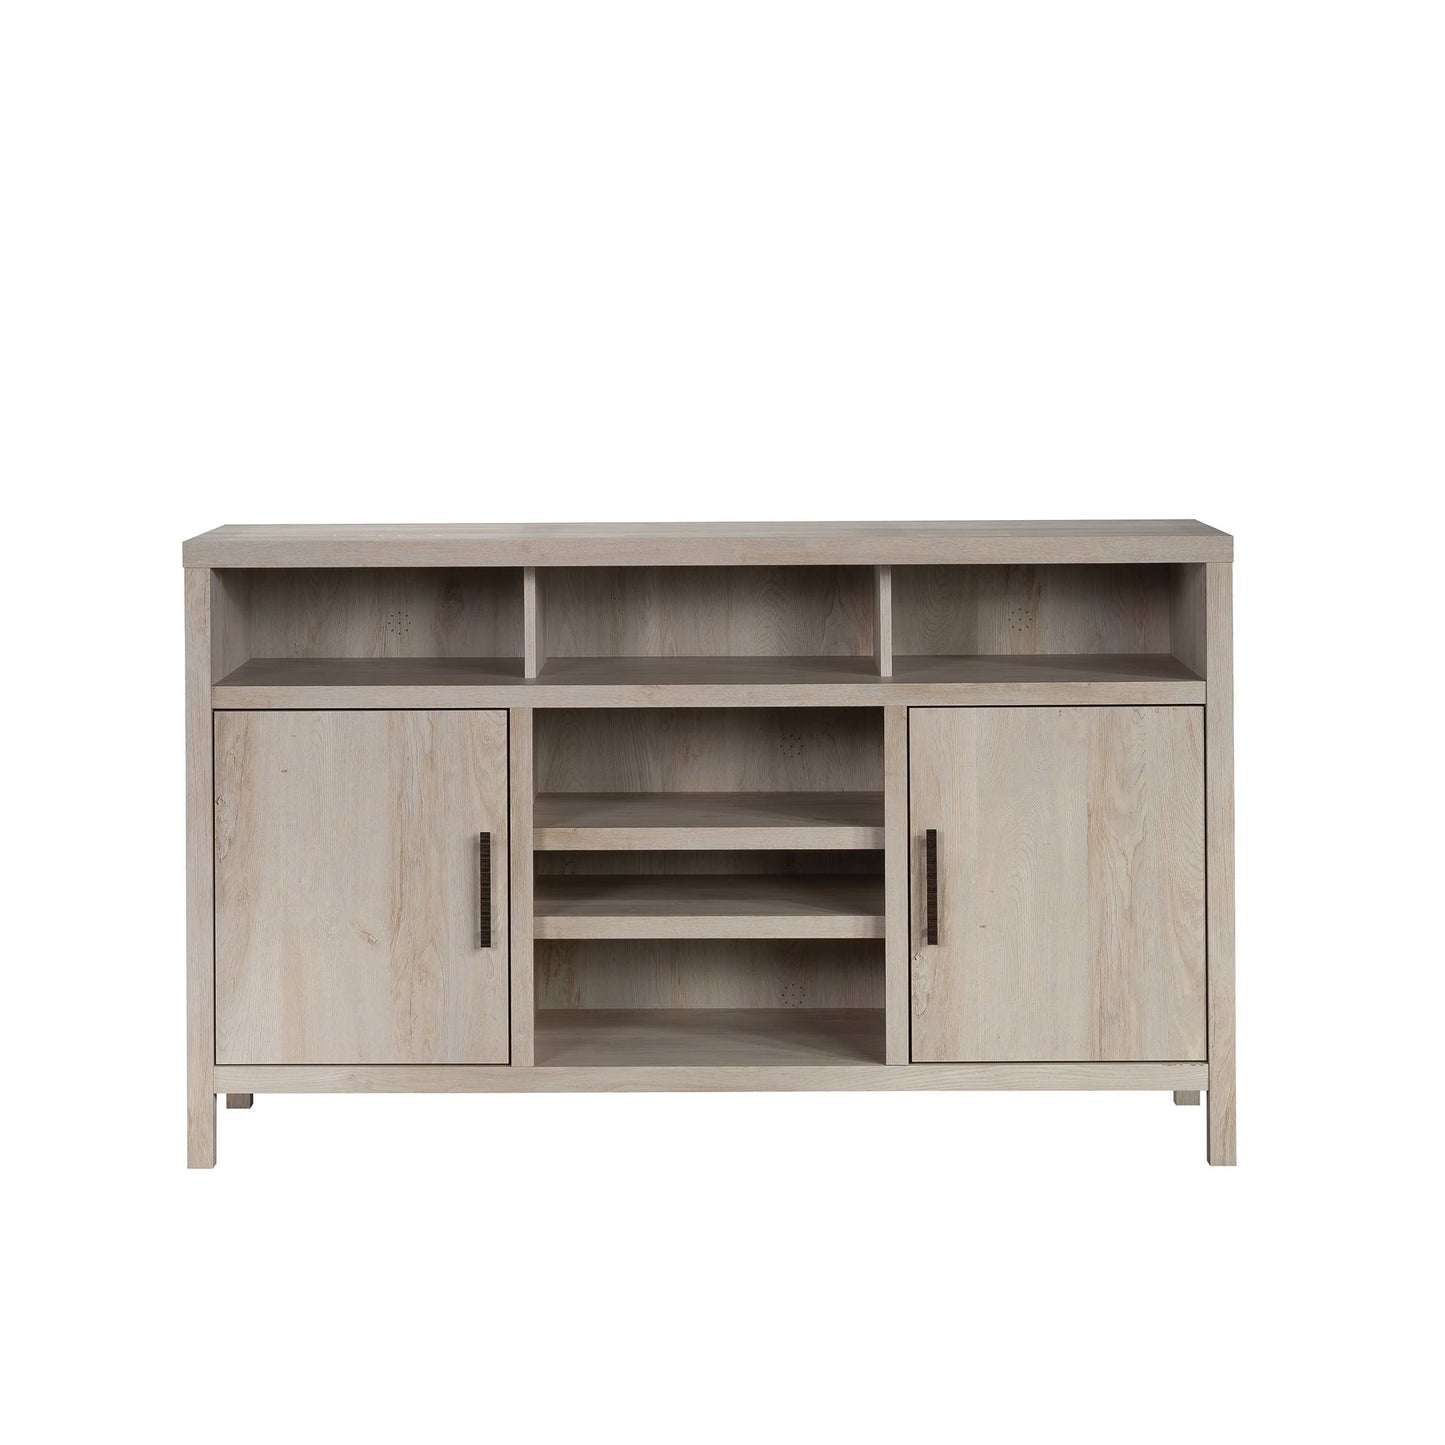 + Roth Transitional Light Chestnut Tv Cabinet (Accommodates Tvs Up To 60-In) In Off-White | 433214